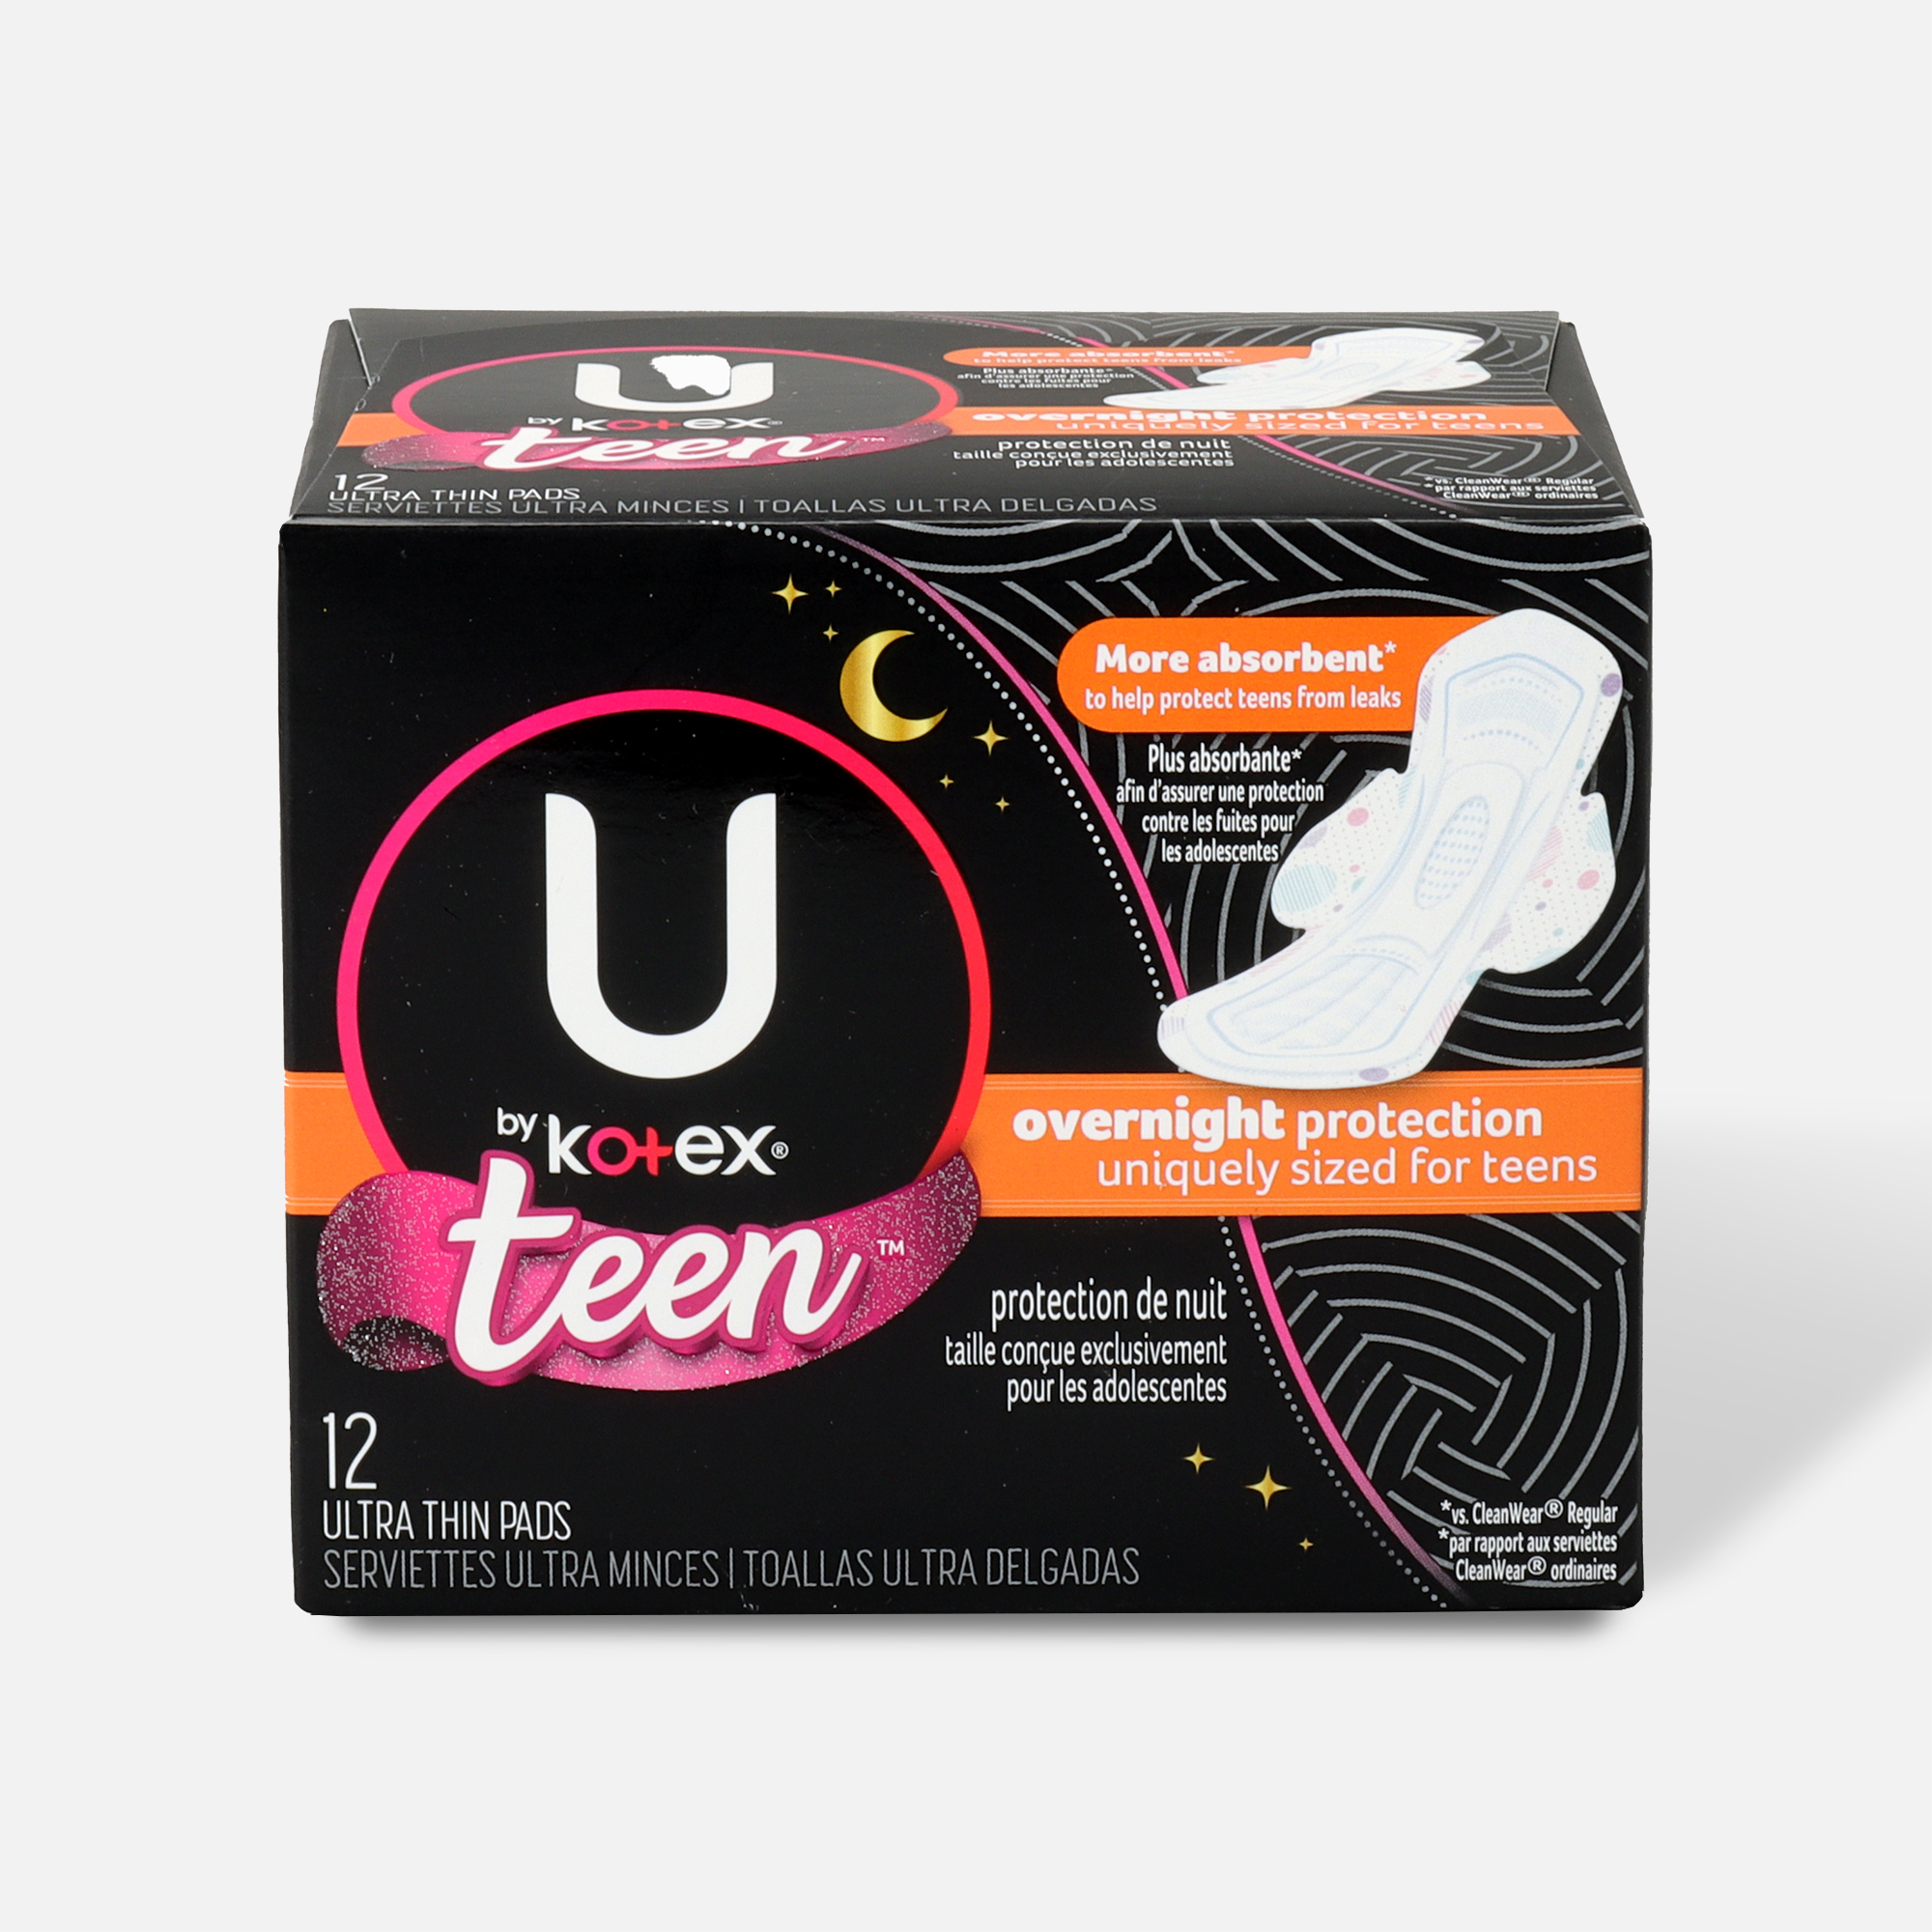 Foster parents piece Quagmire U by Kotex Super Premium Ultra Thin Overnight with Wings Teen Pad, 12 ct.